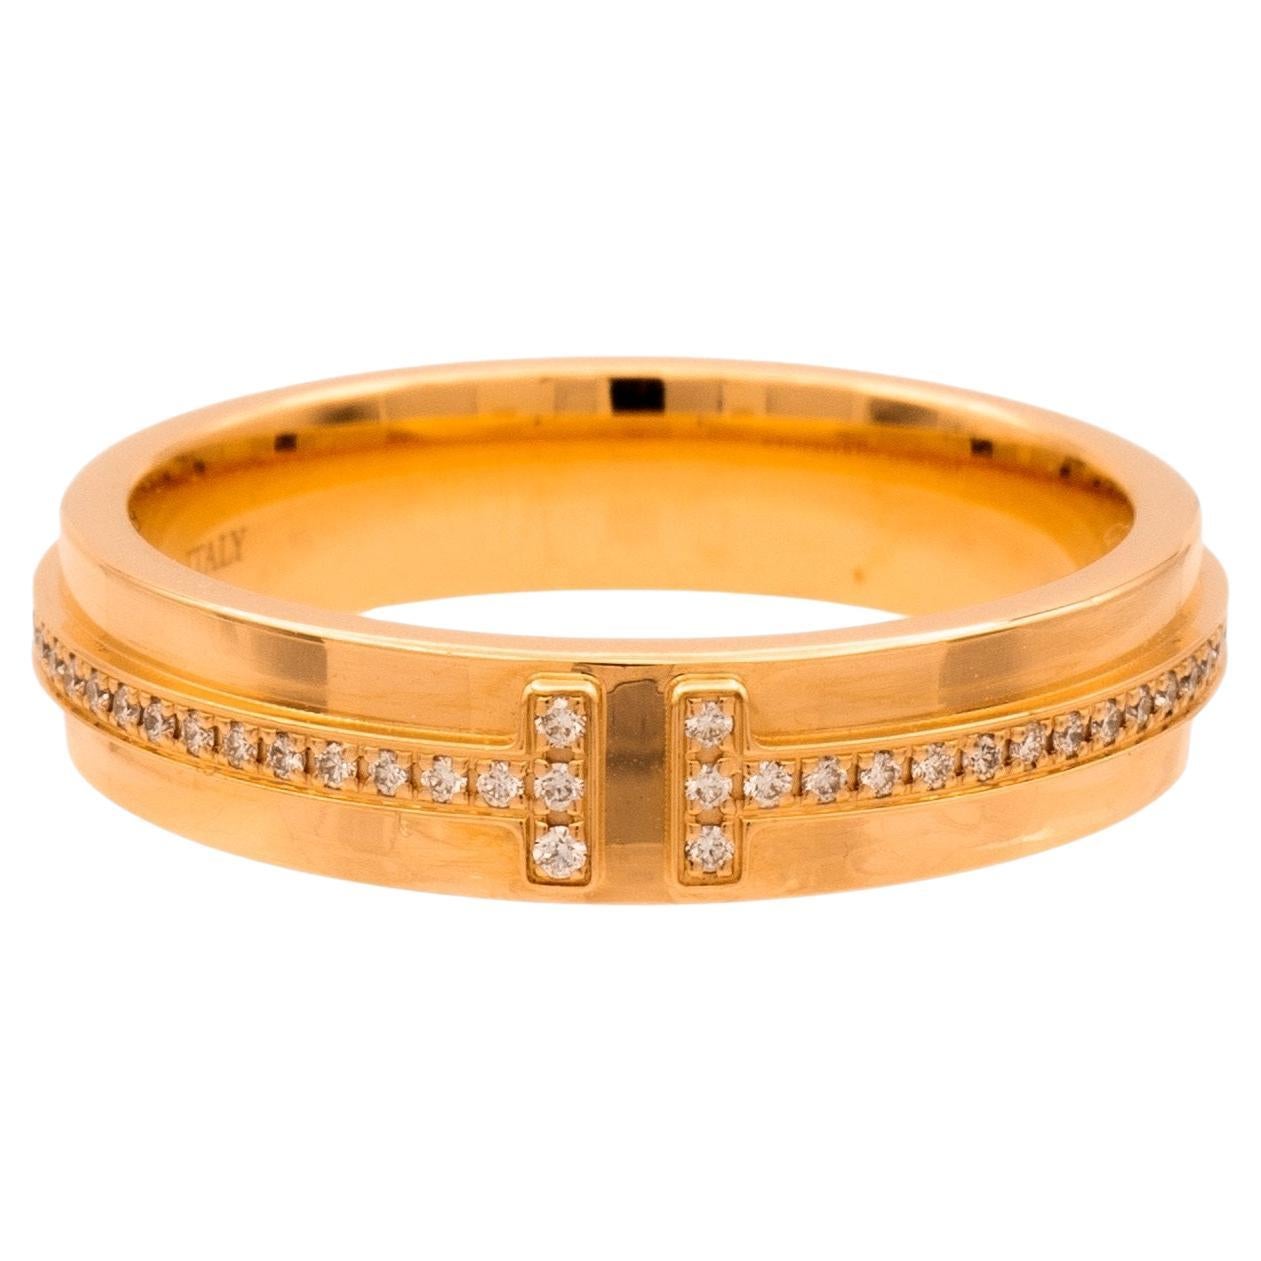 Tiffany & Co. T Narrow 18K Rose Gold 4.5 mm Wide .13 ct Diamond Band Ring Size 7